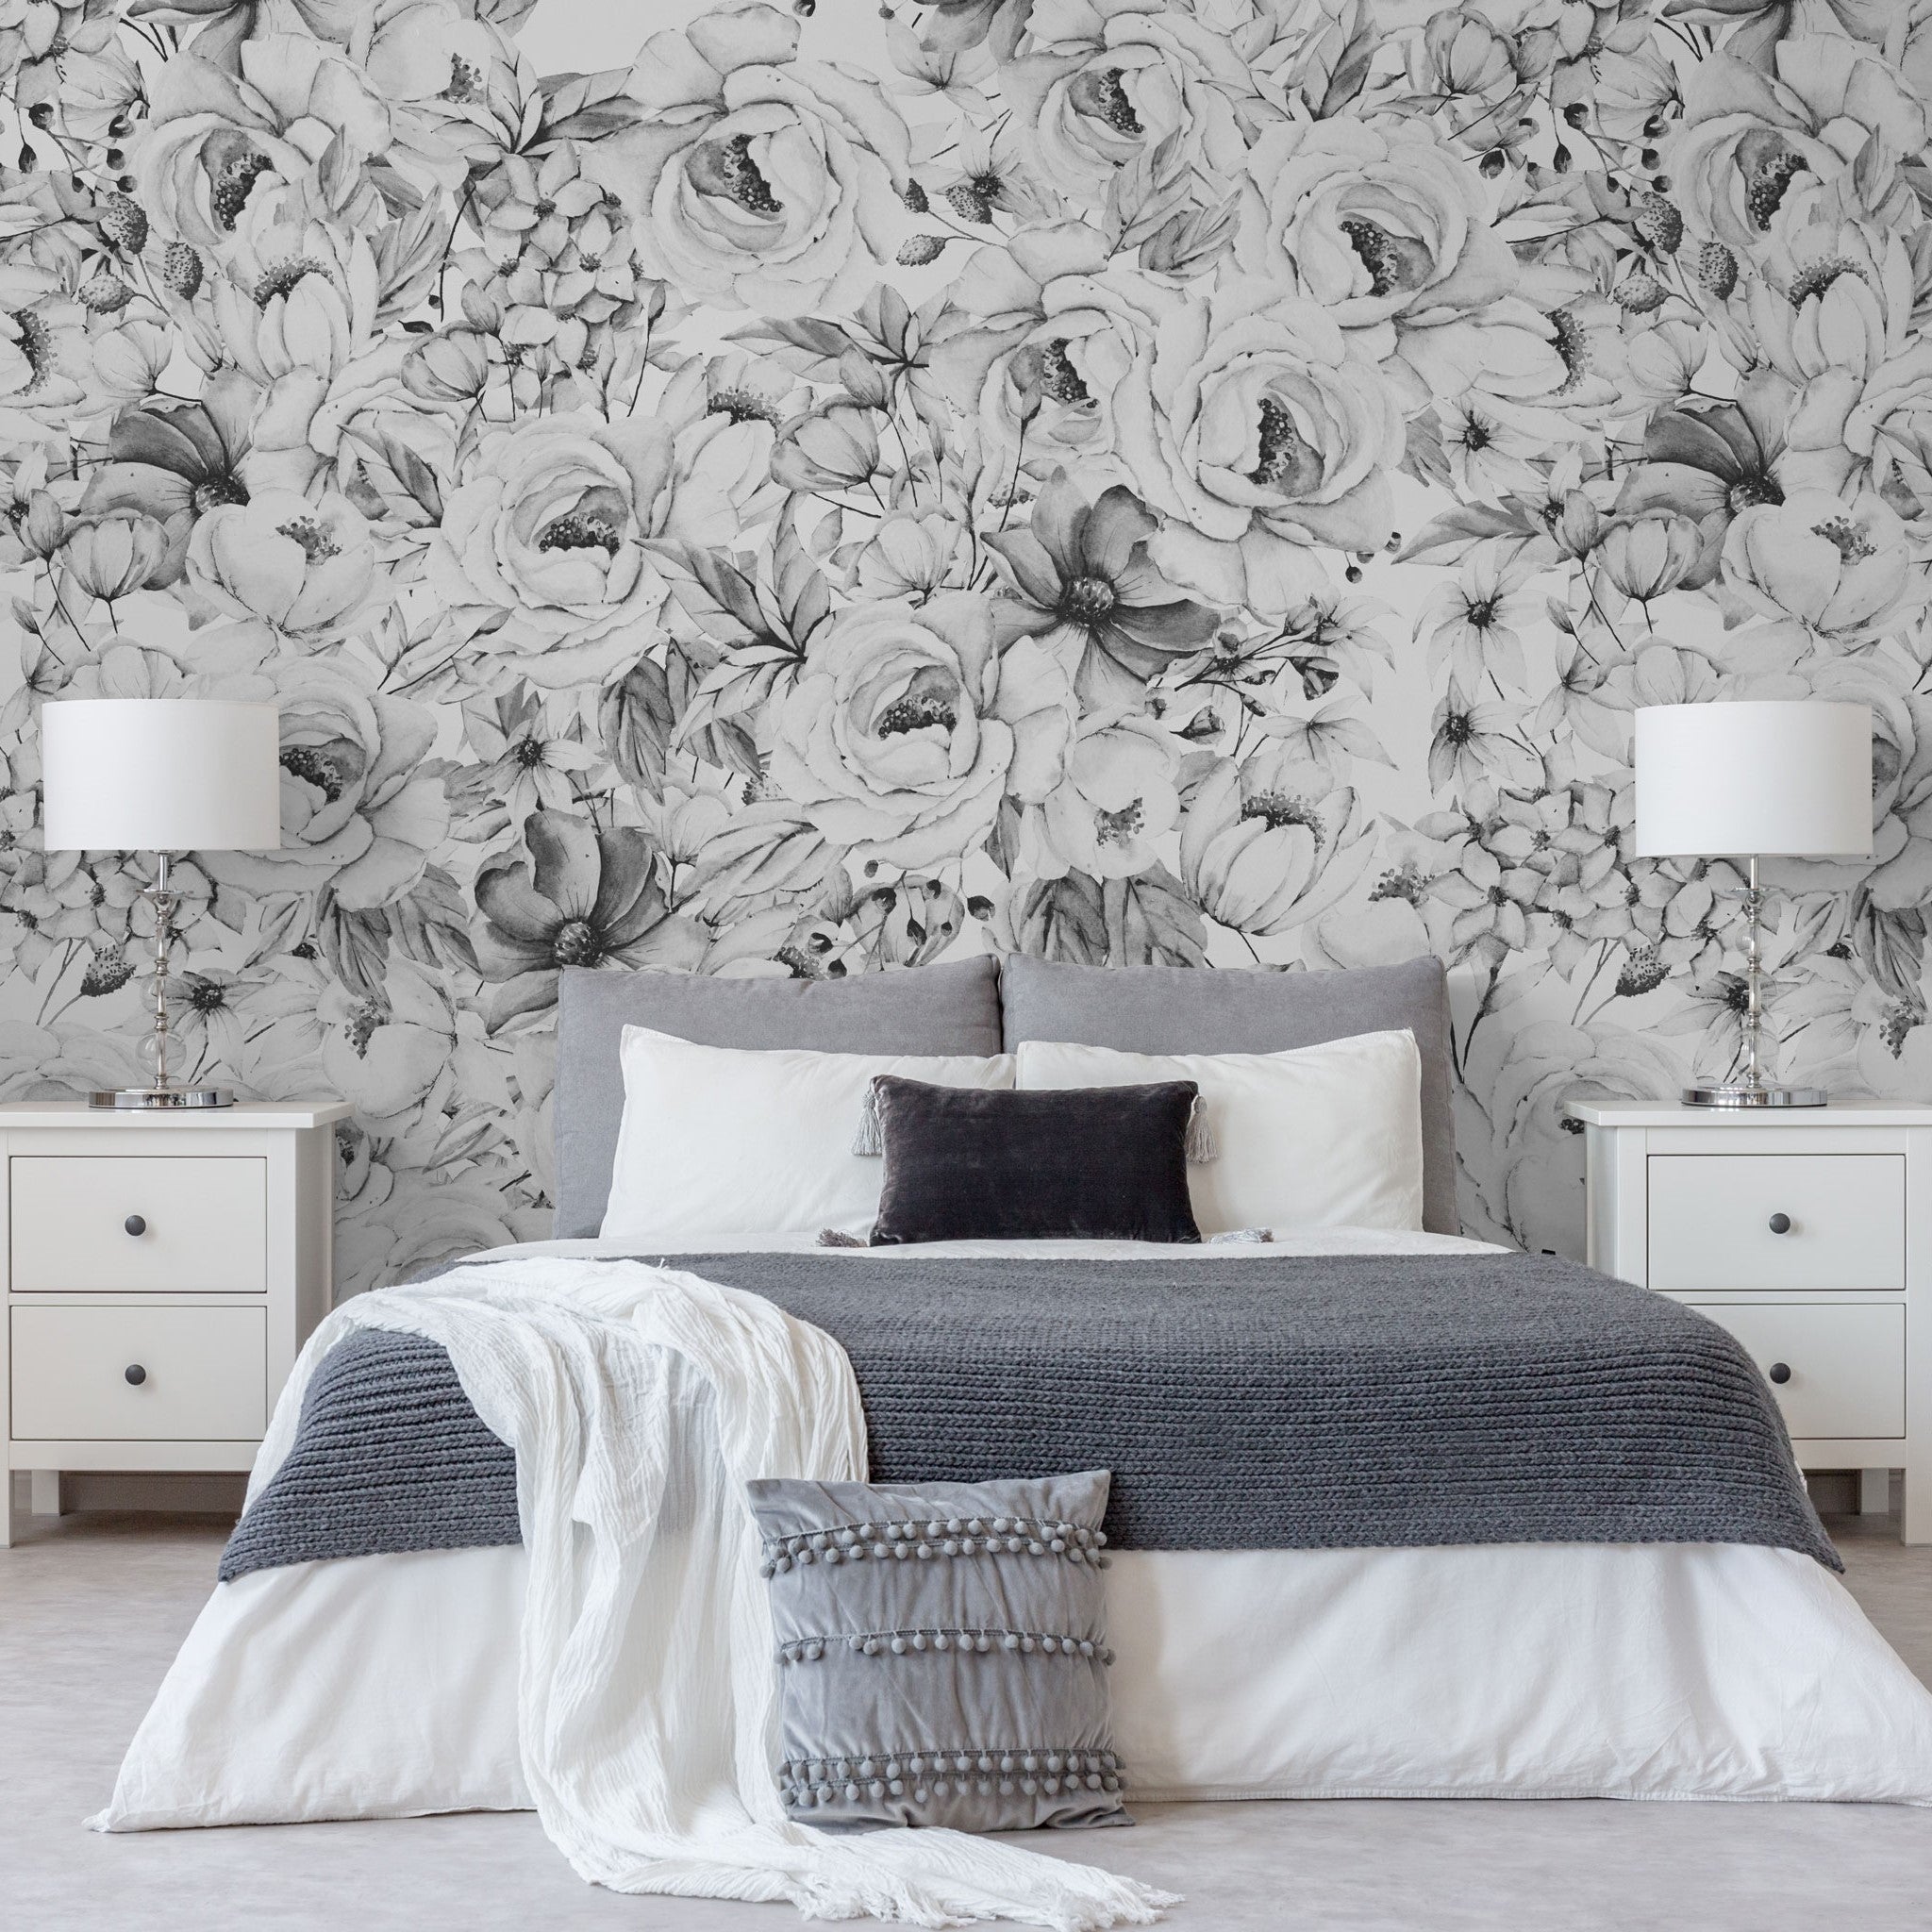 Juliet ( Dark ) - Black and White Watercolor Floral Peel and Stick  Wallpaper– WALL BLUSH